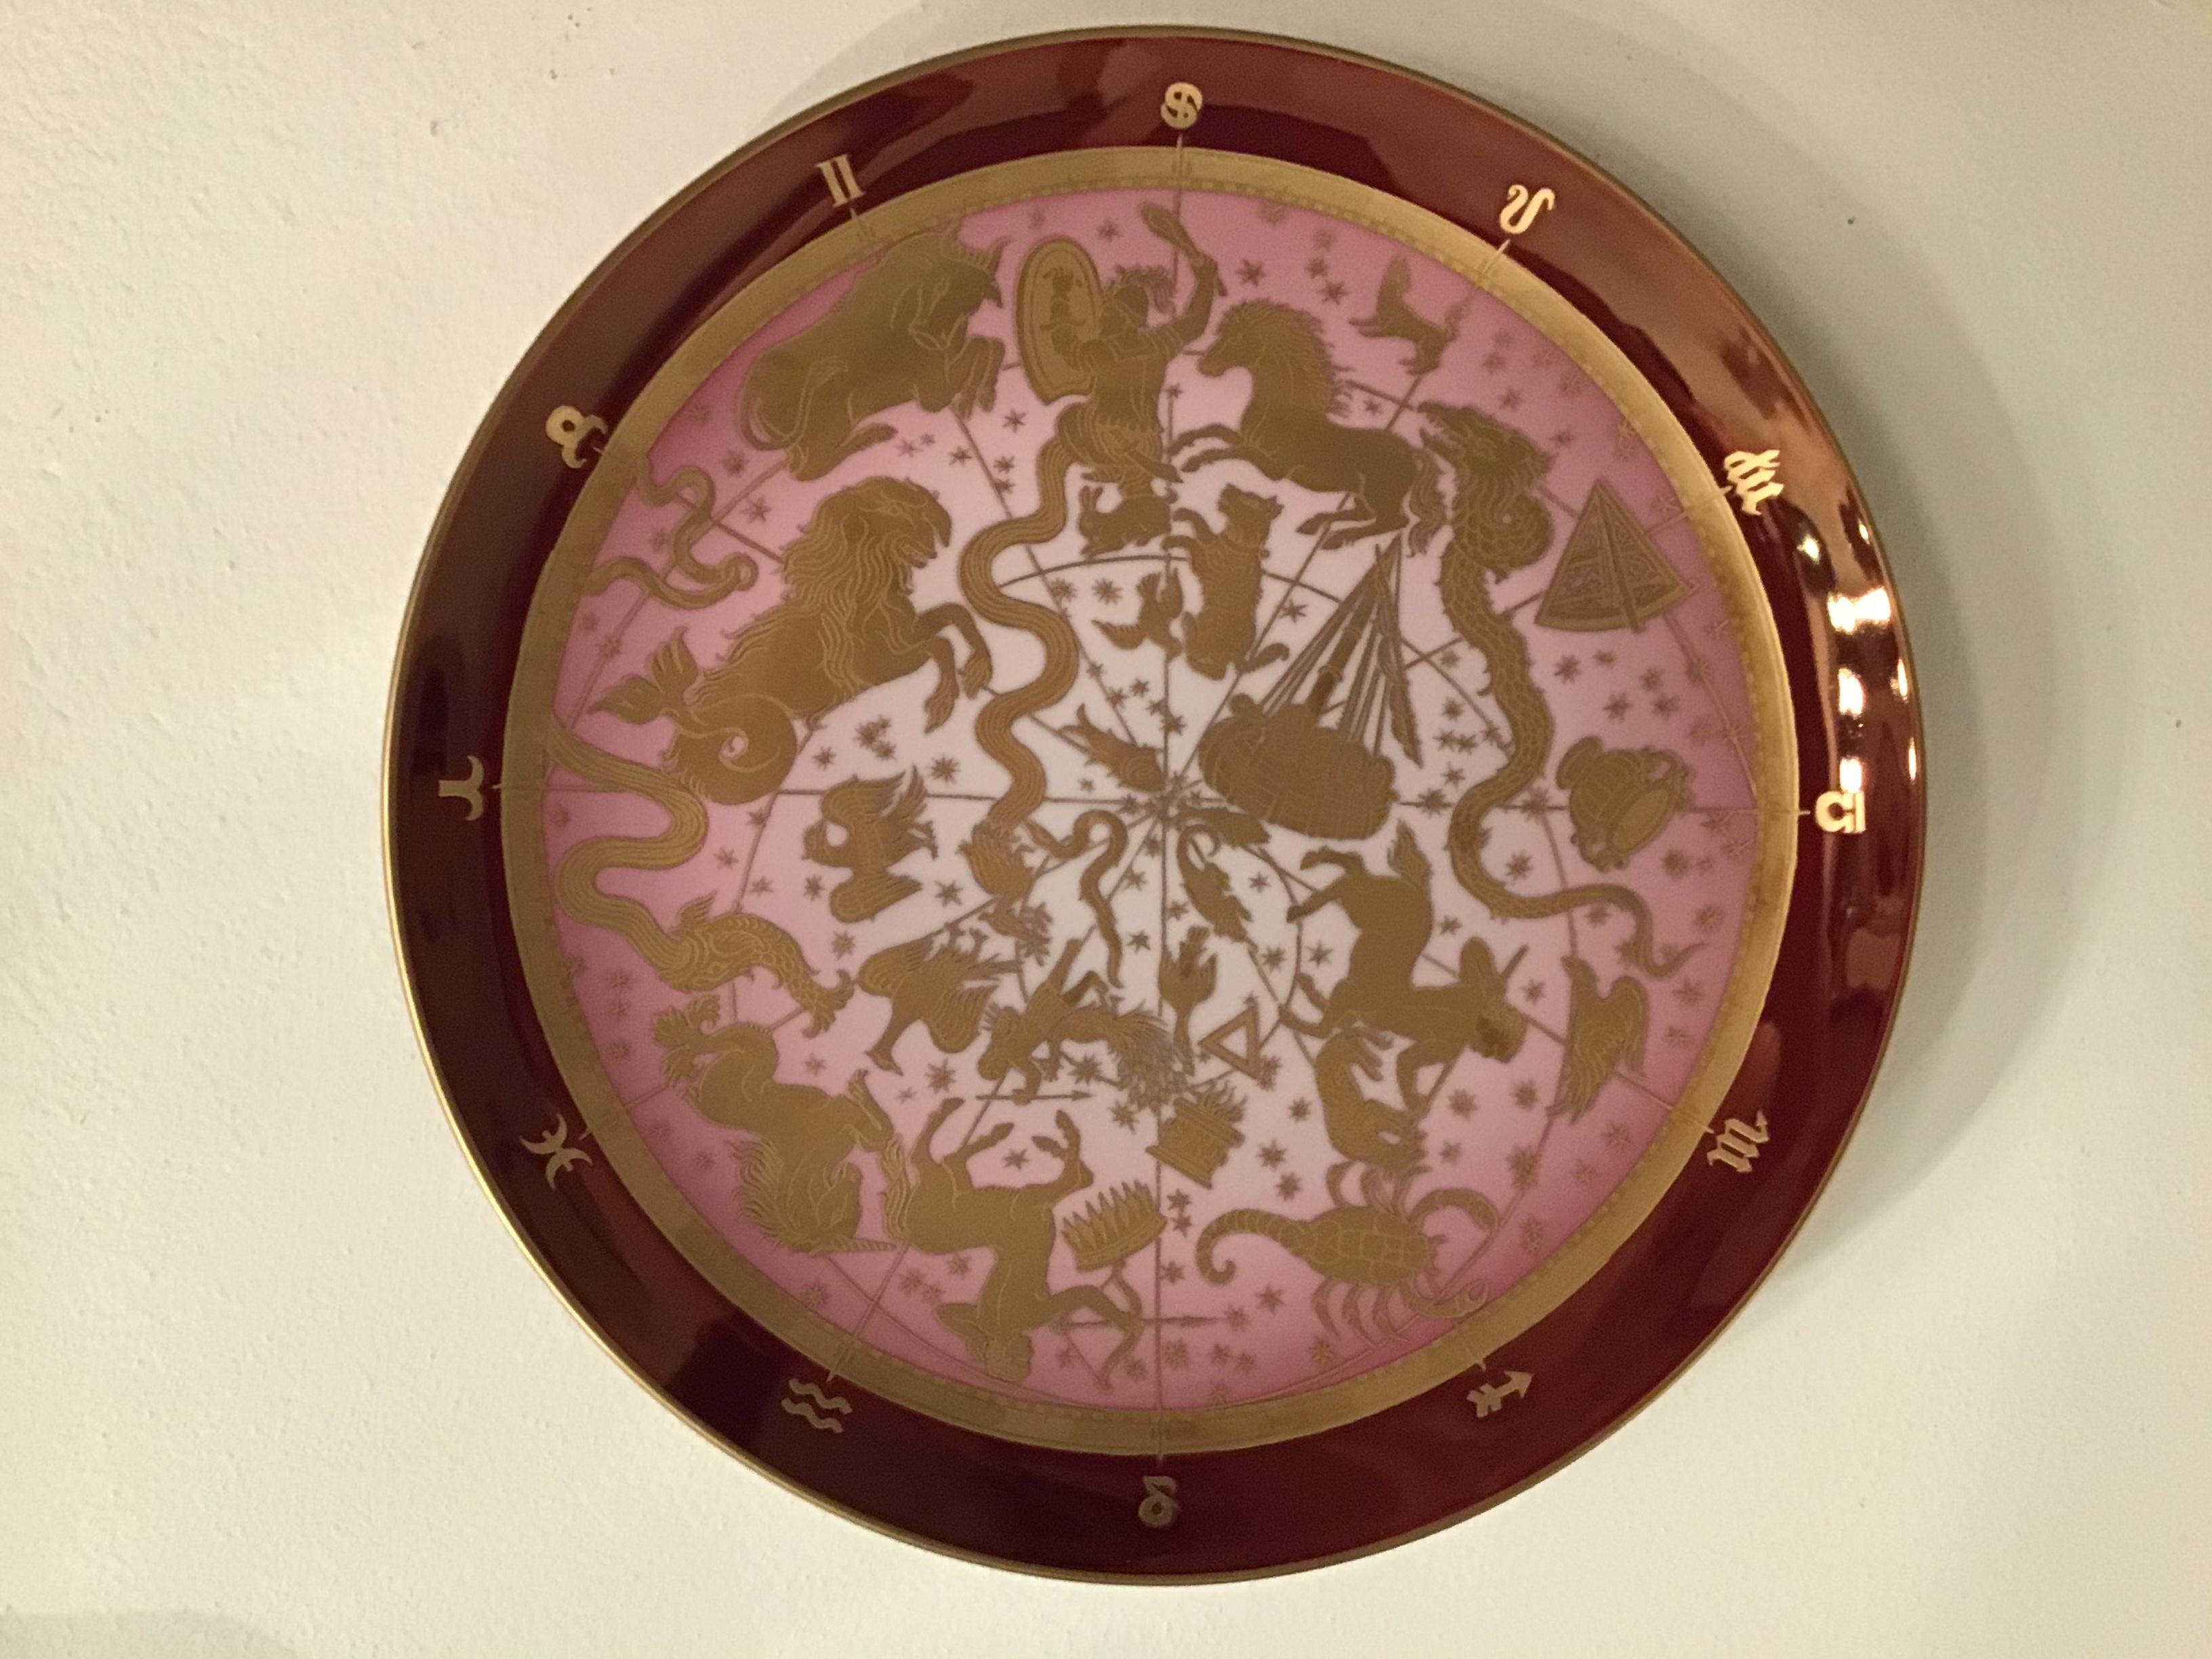 Morbelli Porcelain Wall Plate “Planisfero Celeste“ Worked with Pure Gold 1960 IT For Sale 4